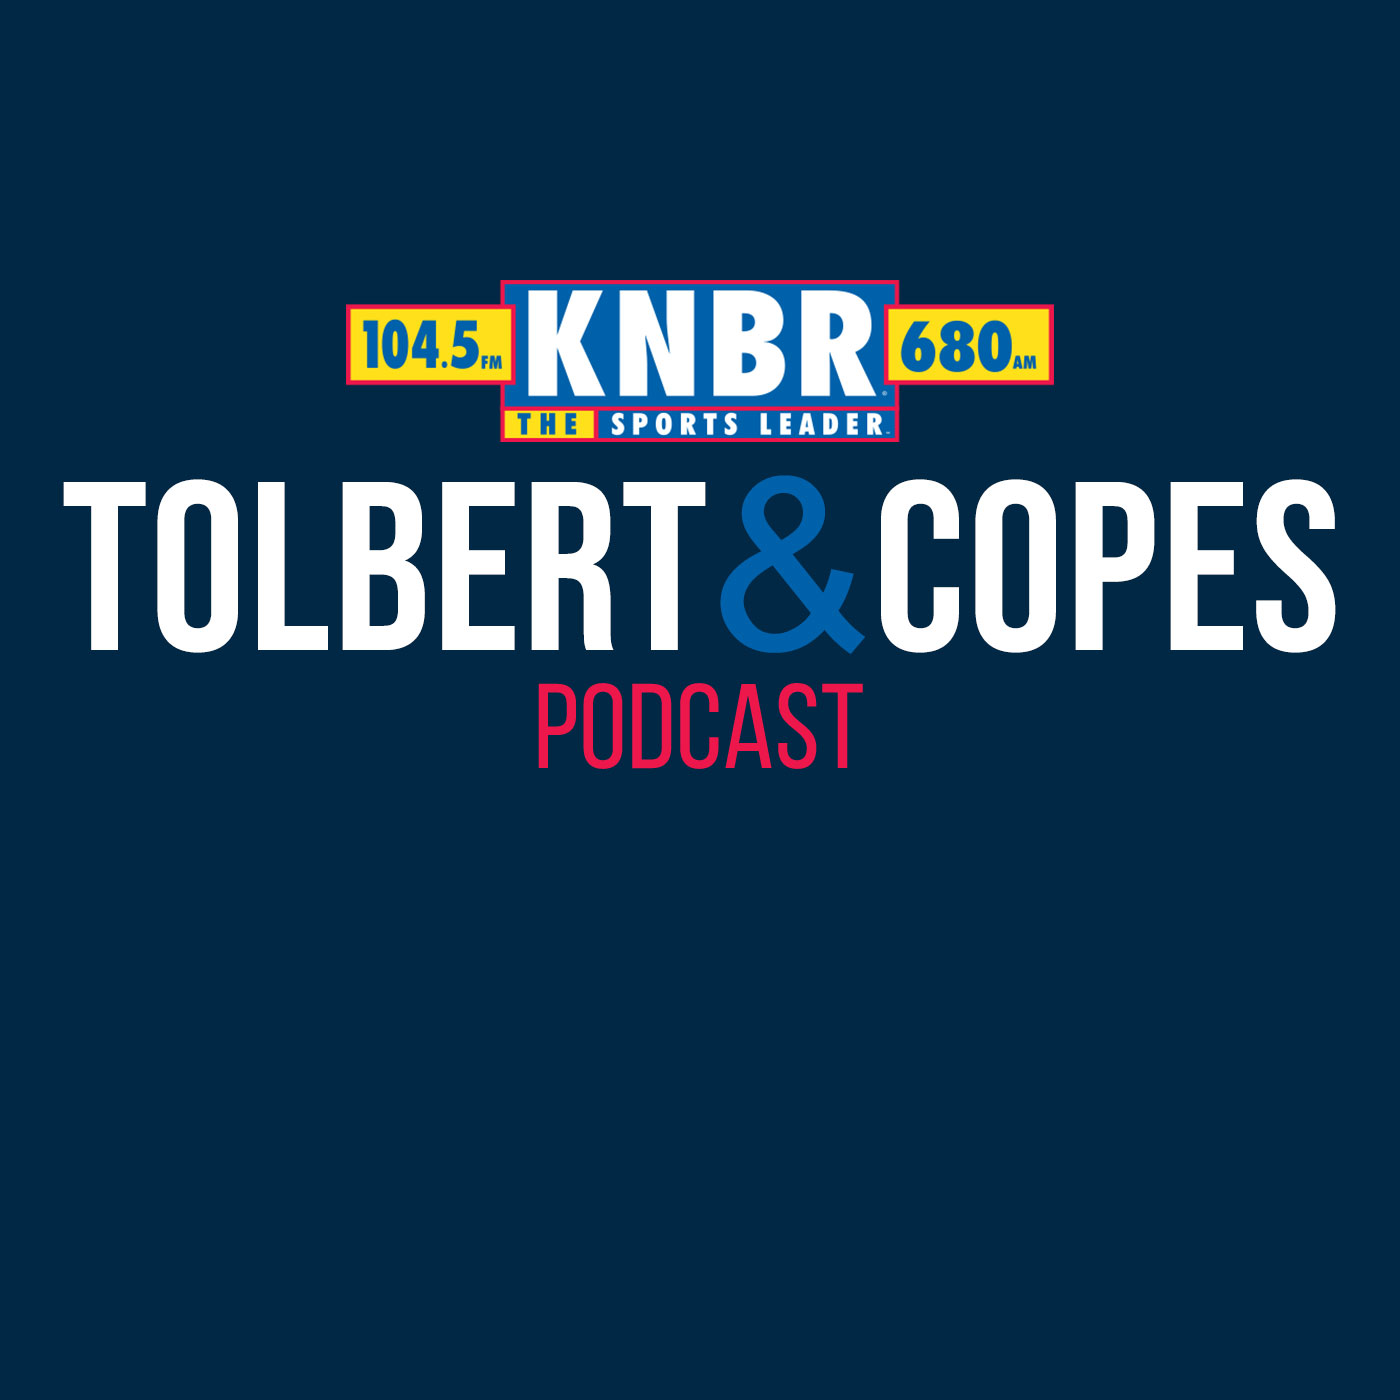 4-26 Marcus Thompson joins Tolbert & Copes to discuss if the 49ers could trade Deebo Samuel